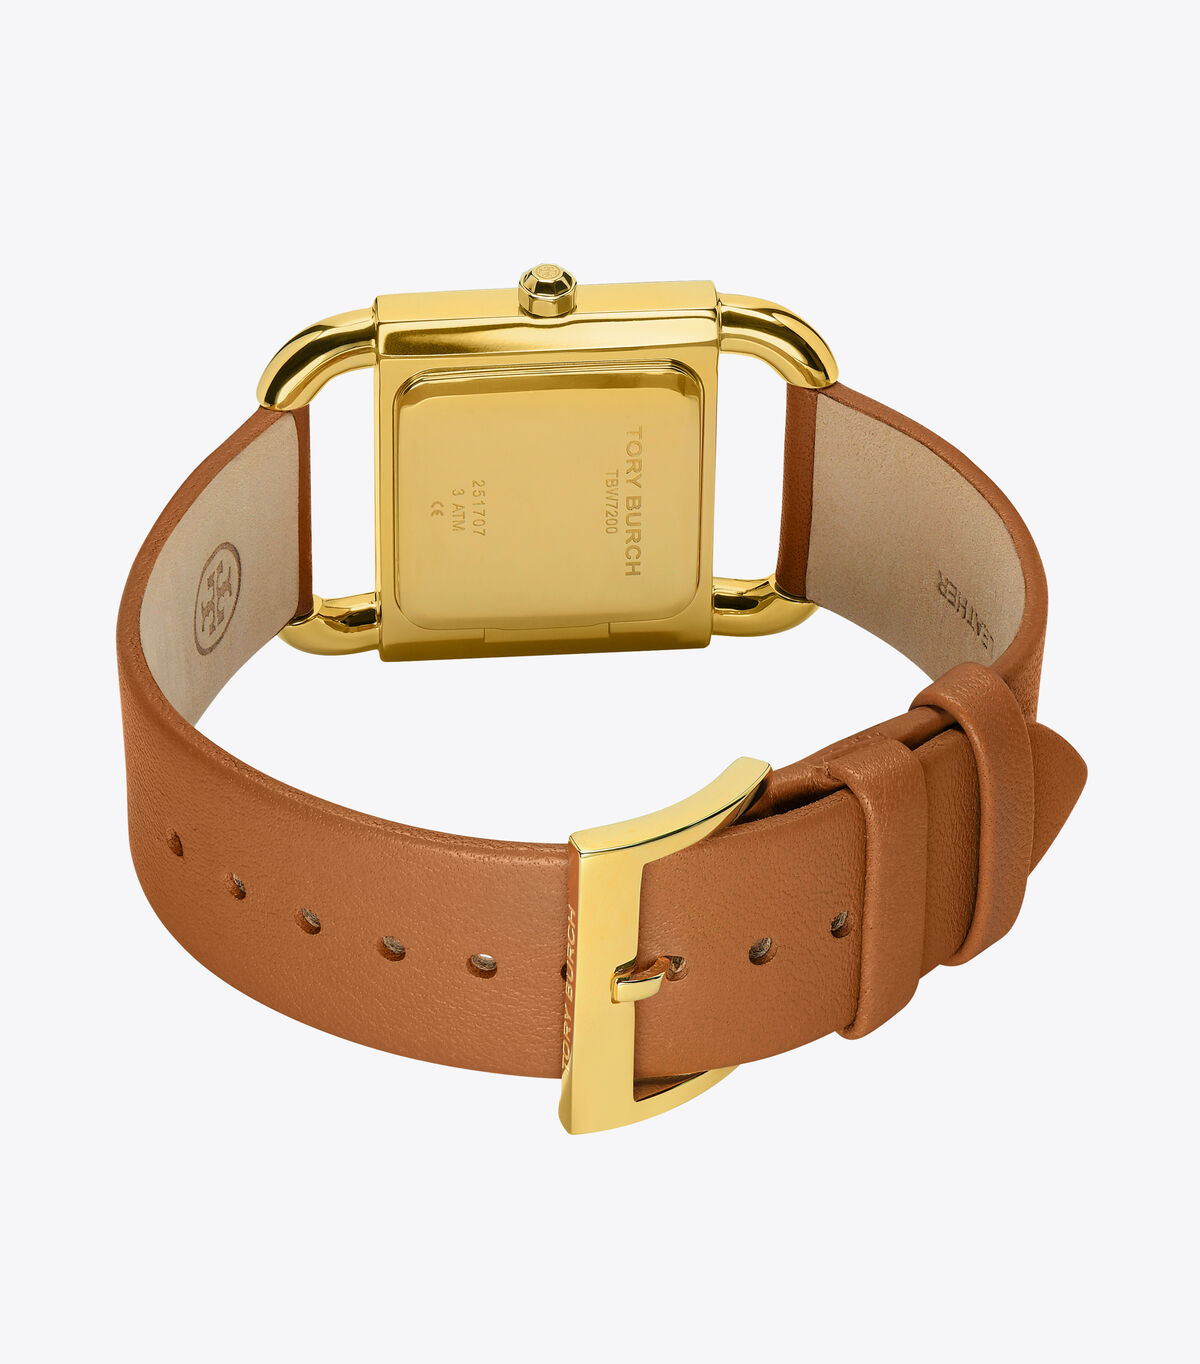 Phipps Watch, Luggage Leather/Gold-Tone, 29 X 41 MM